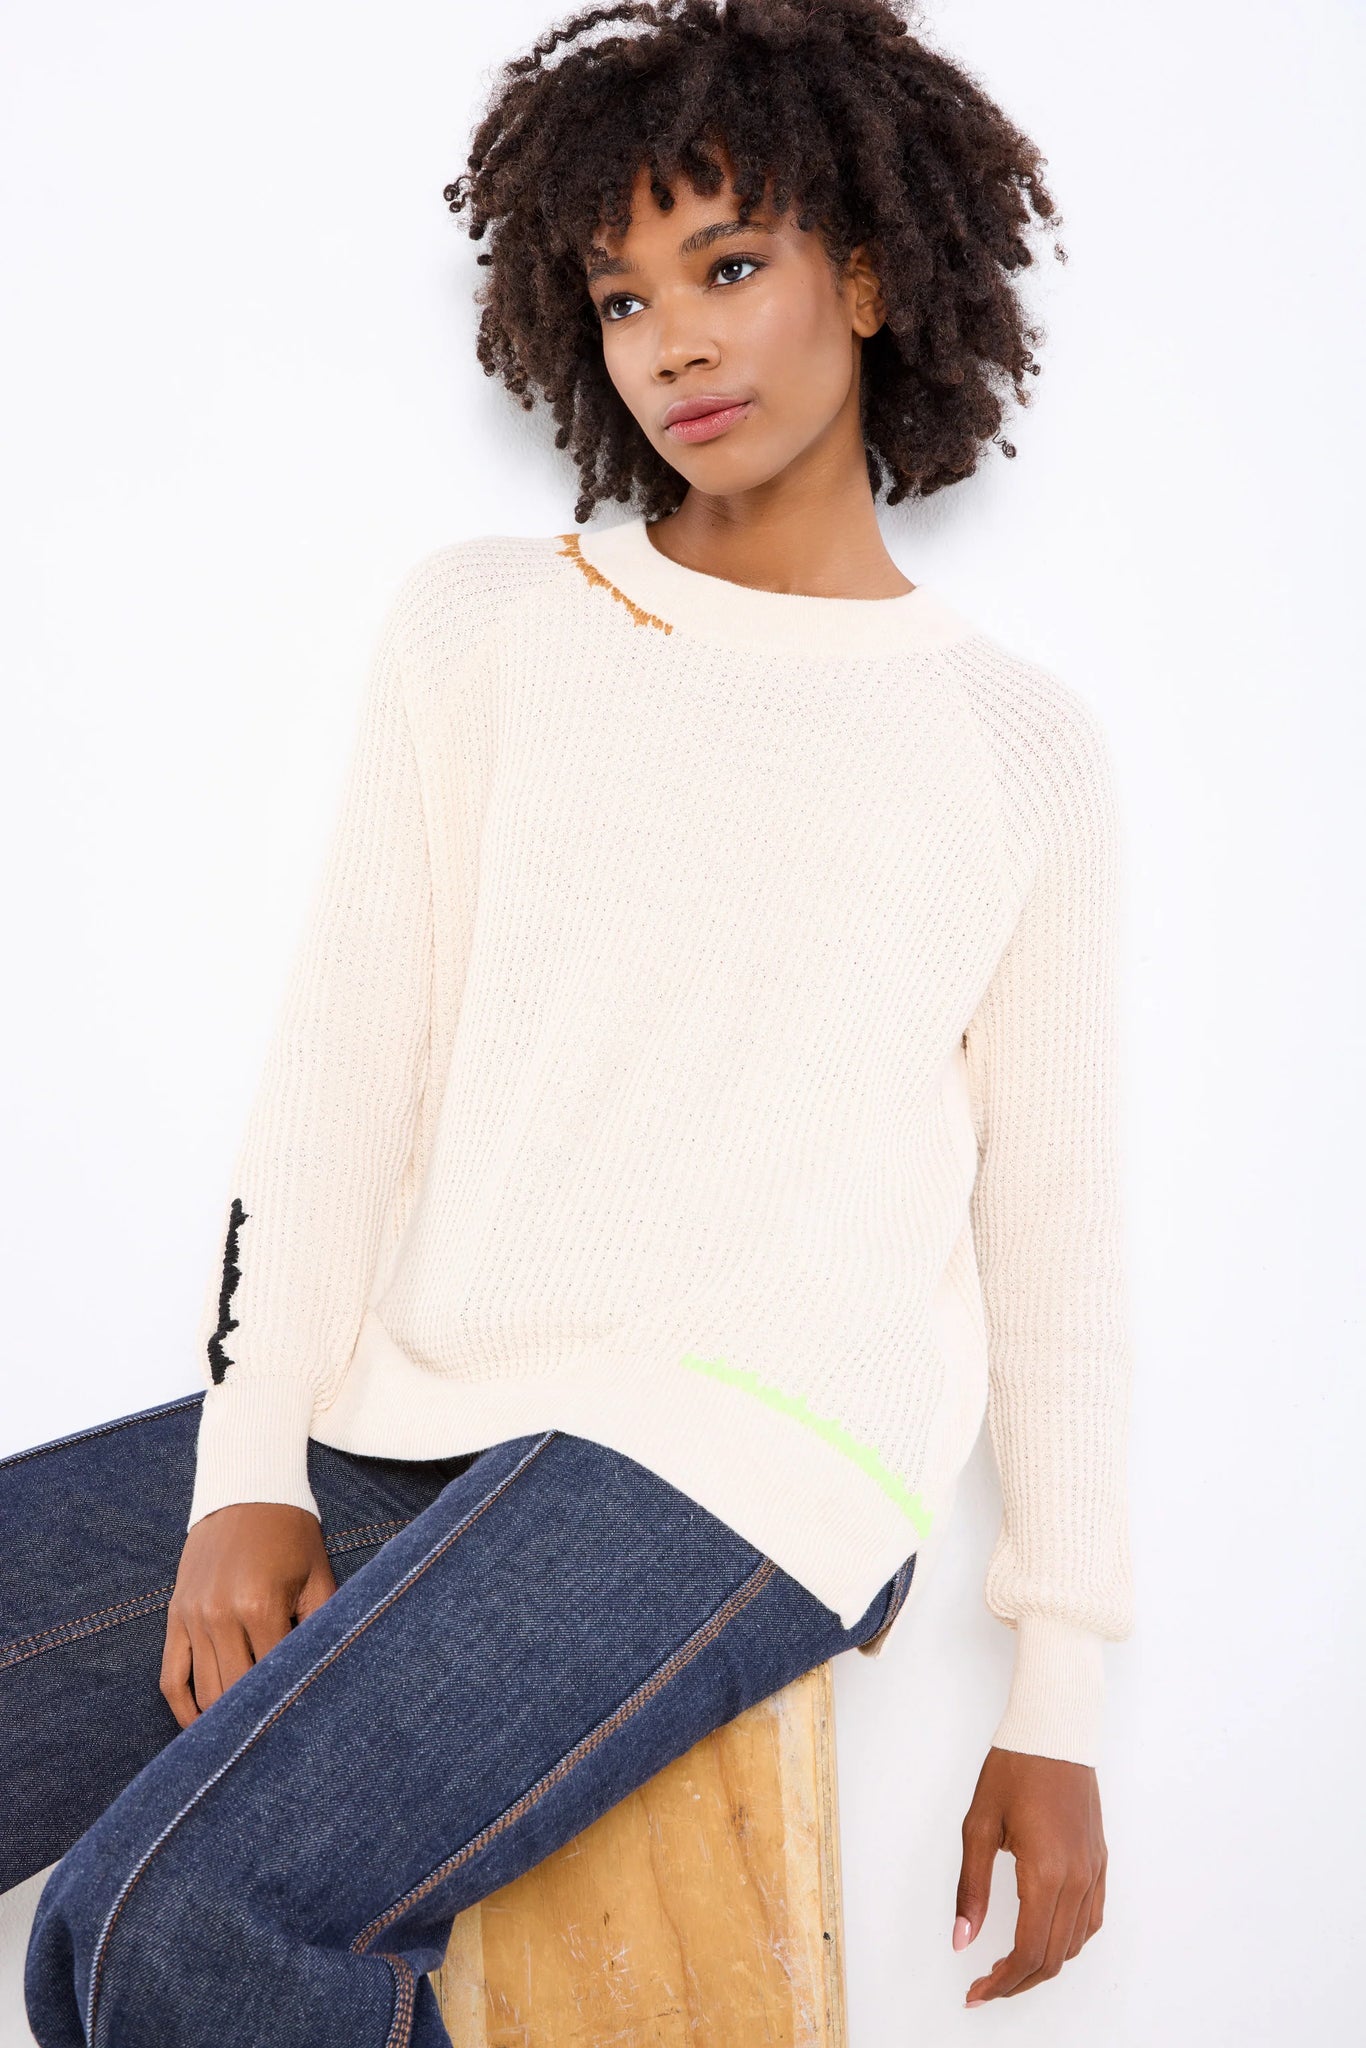 LISA TODD  POINT OF VIEW SWEATER